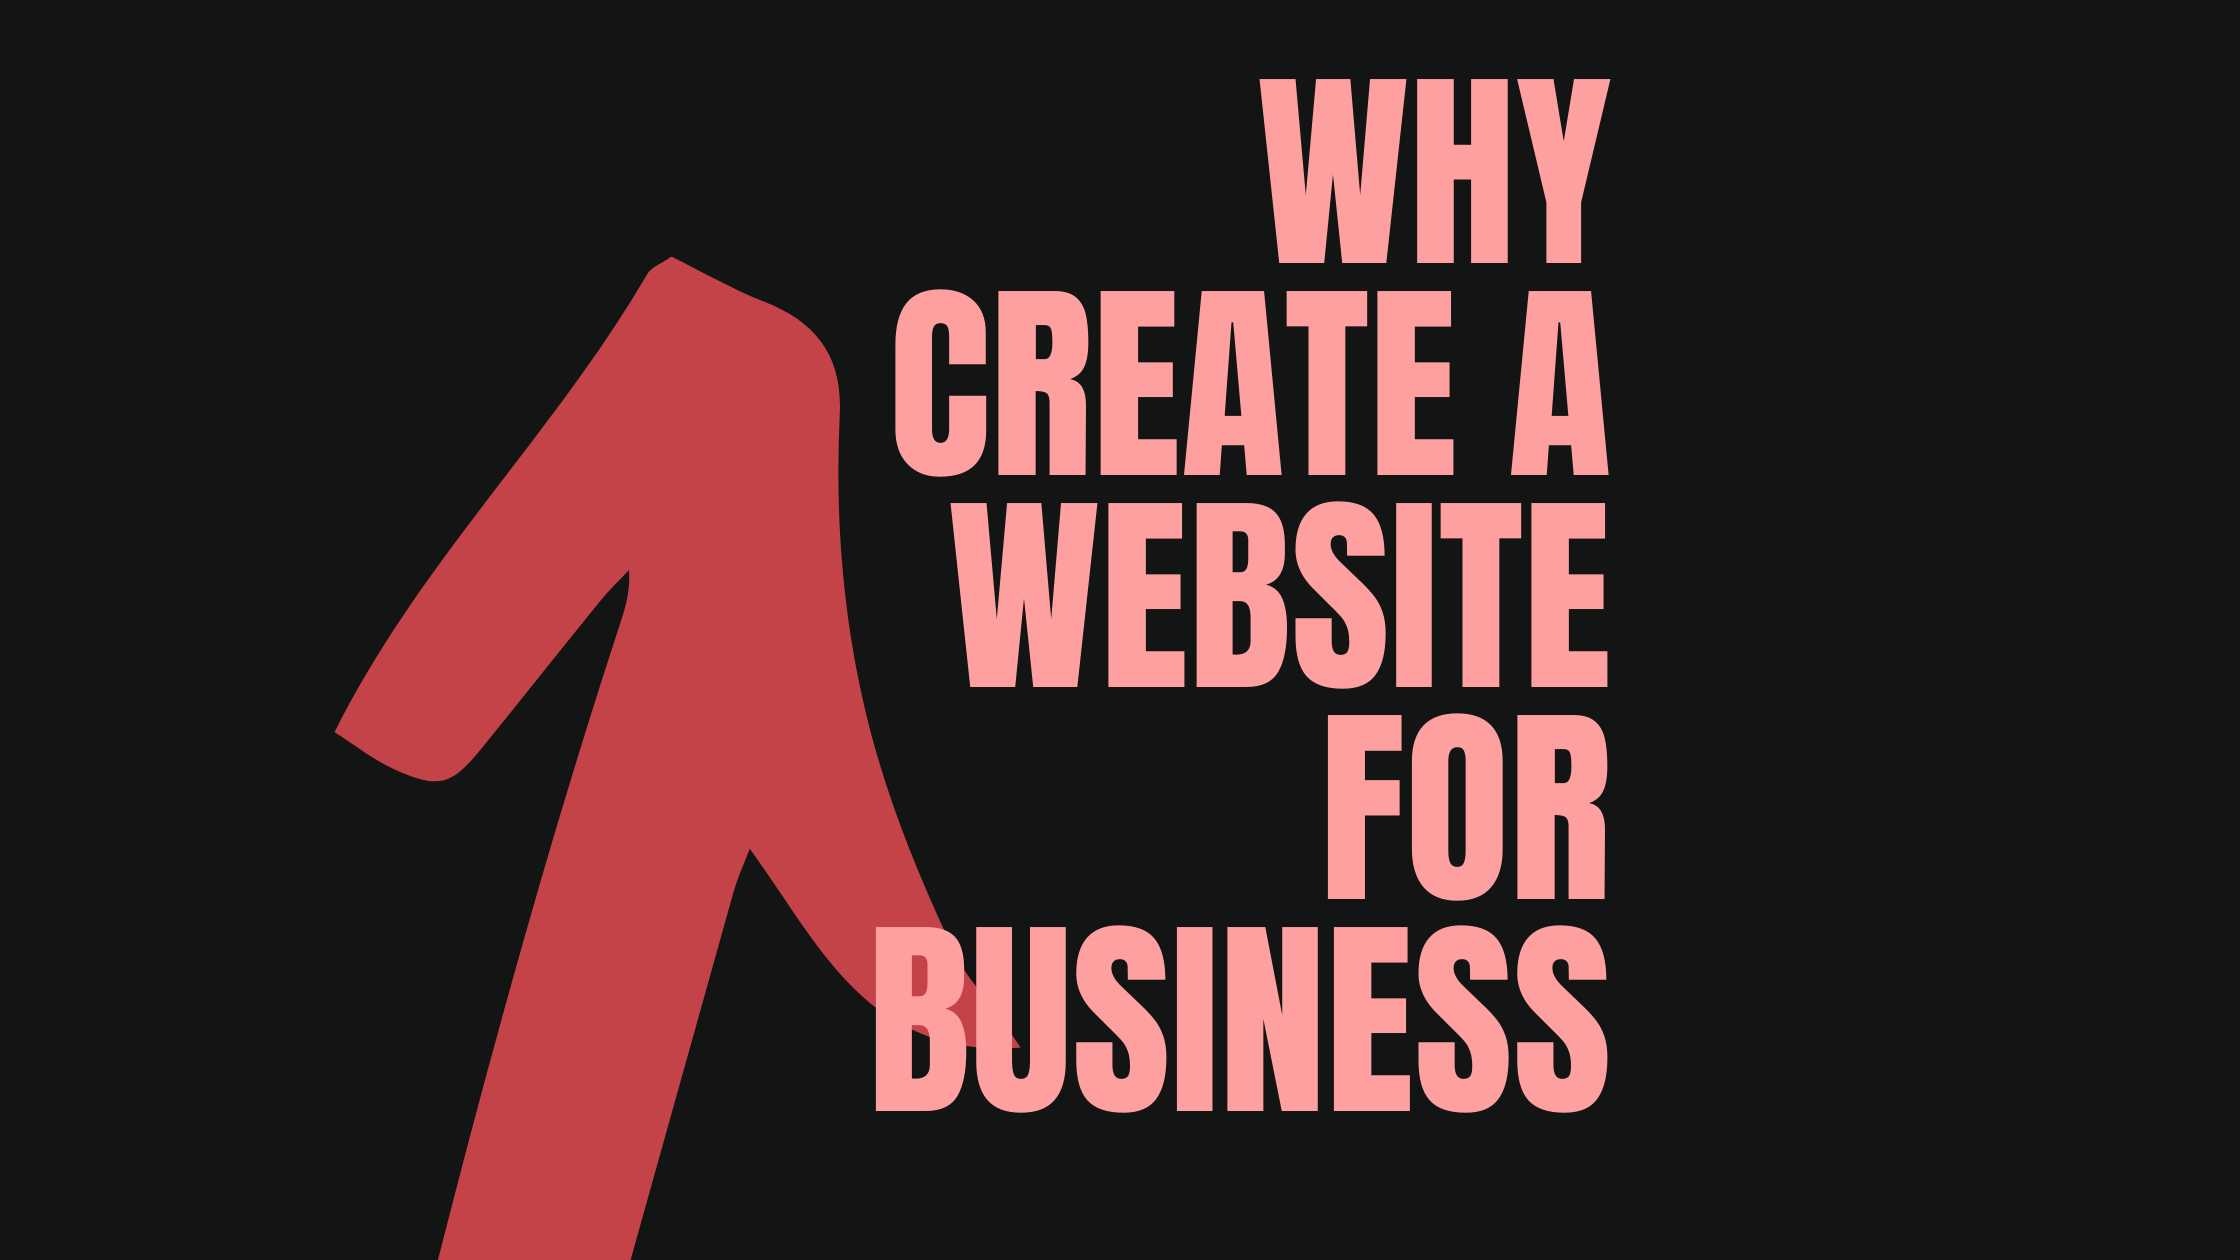 Why Create a Website for Business text with up arrow